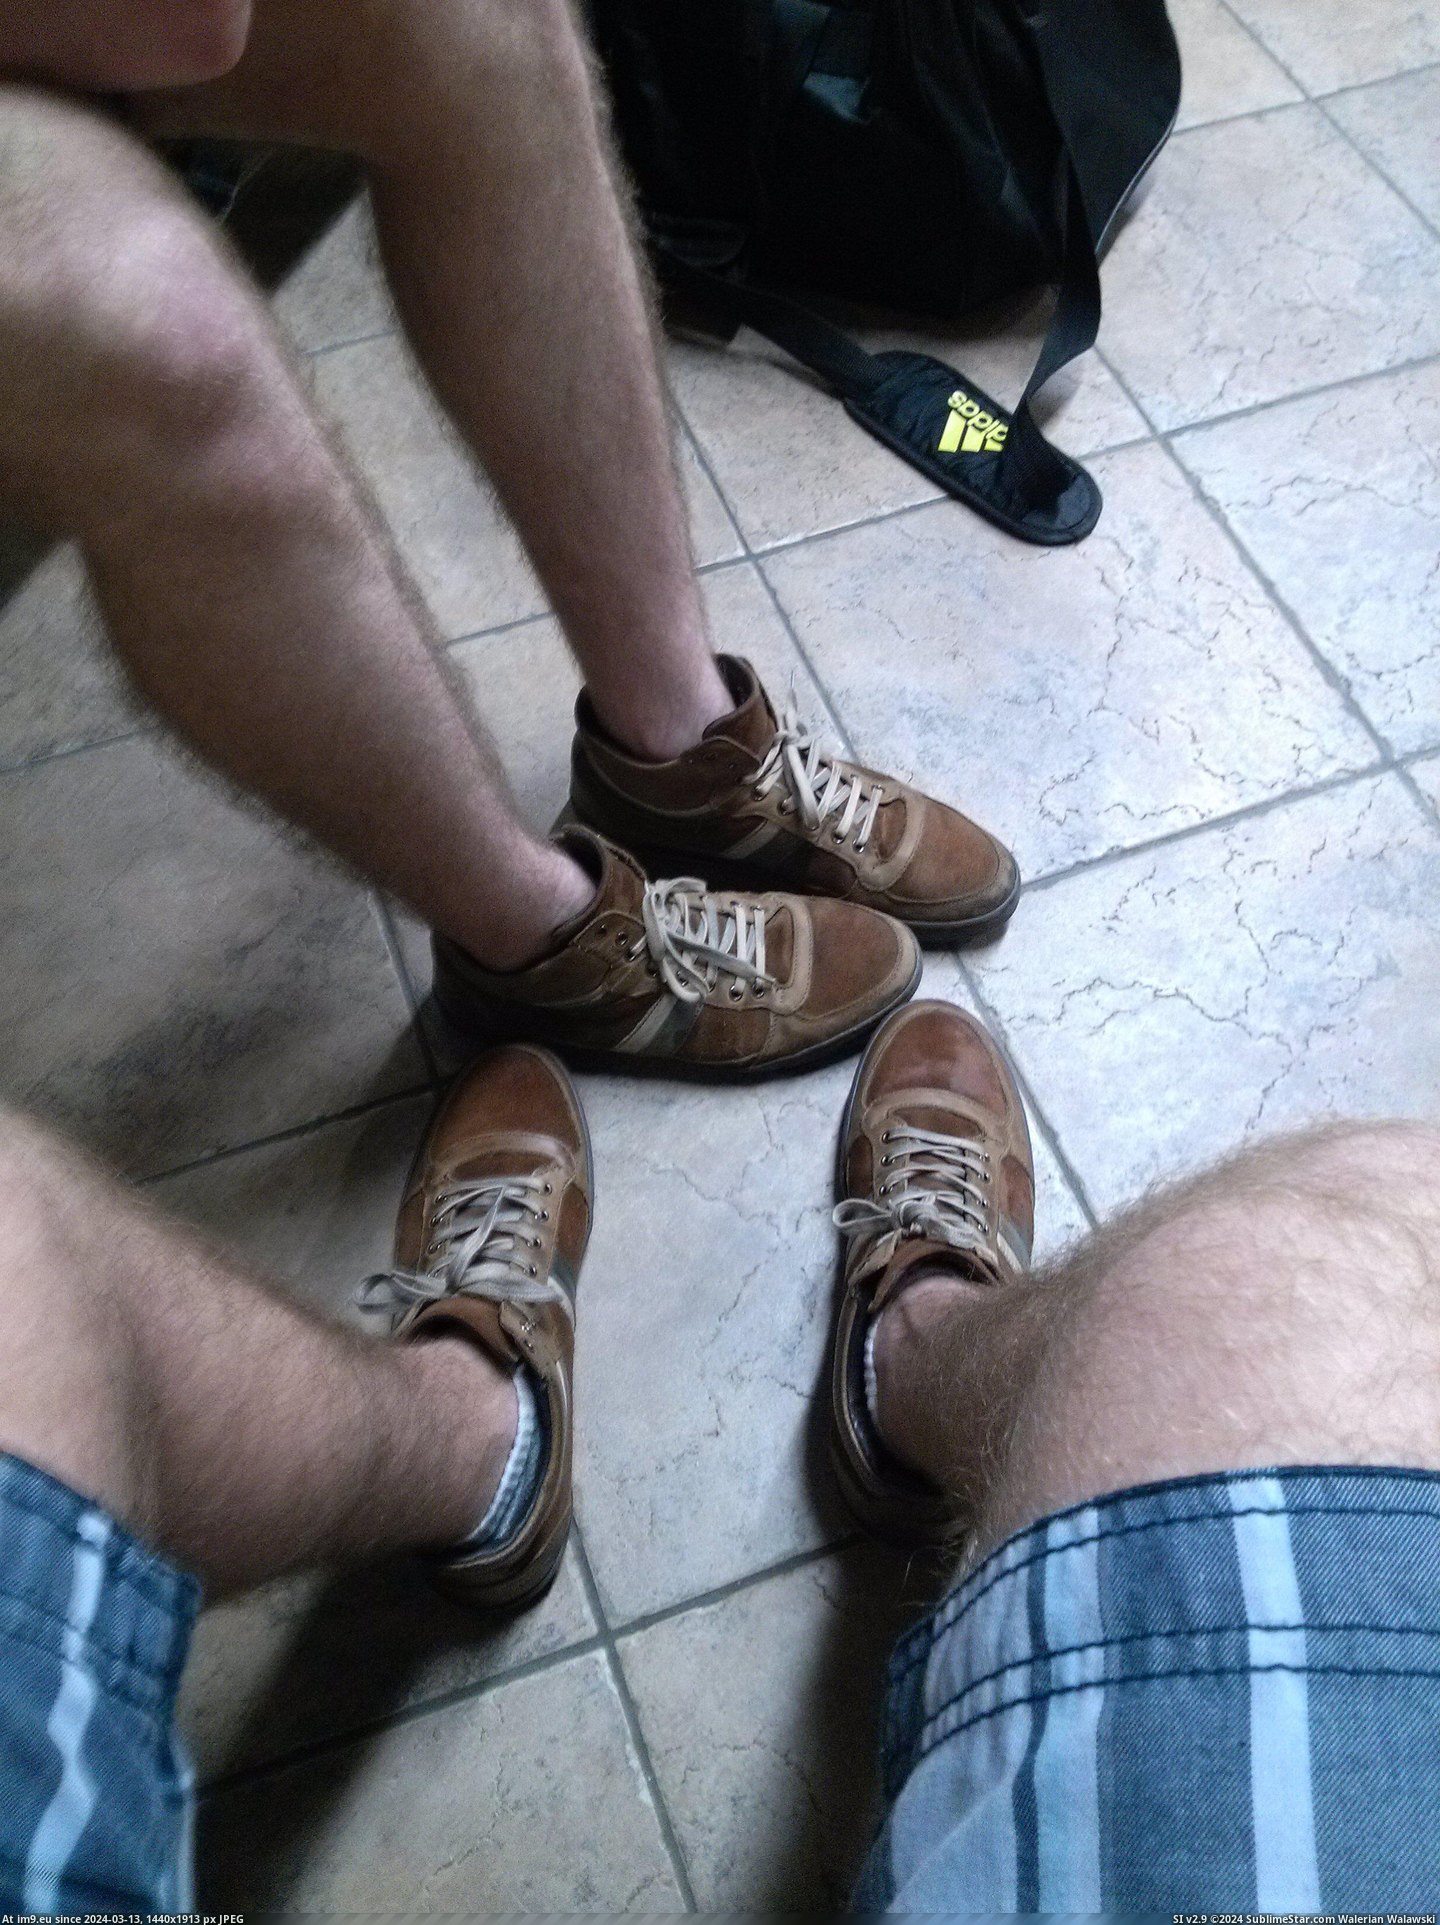 #Did #Bought #Country #Identical #Kno #Twin #Lives #Shoes [Mildlyinteresting] My identical twin who lives in a different country, bought the same shoes as I did. Without either of us kno Pic. (Image of album My r/MILDLYINTERESTING favs))